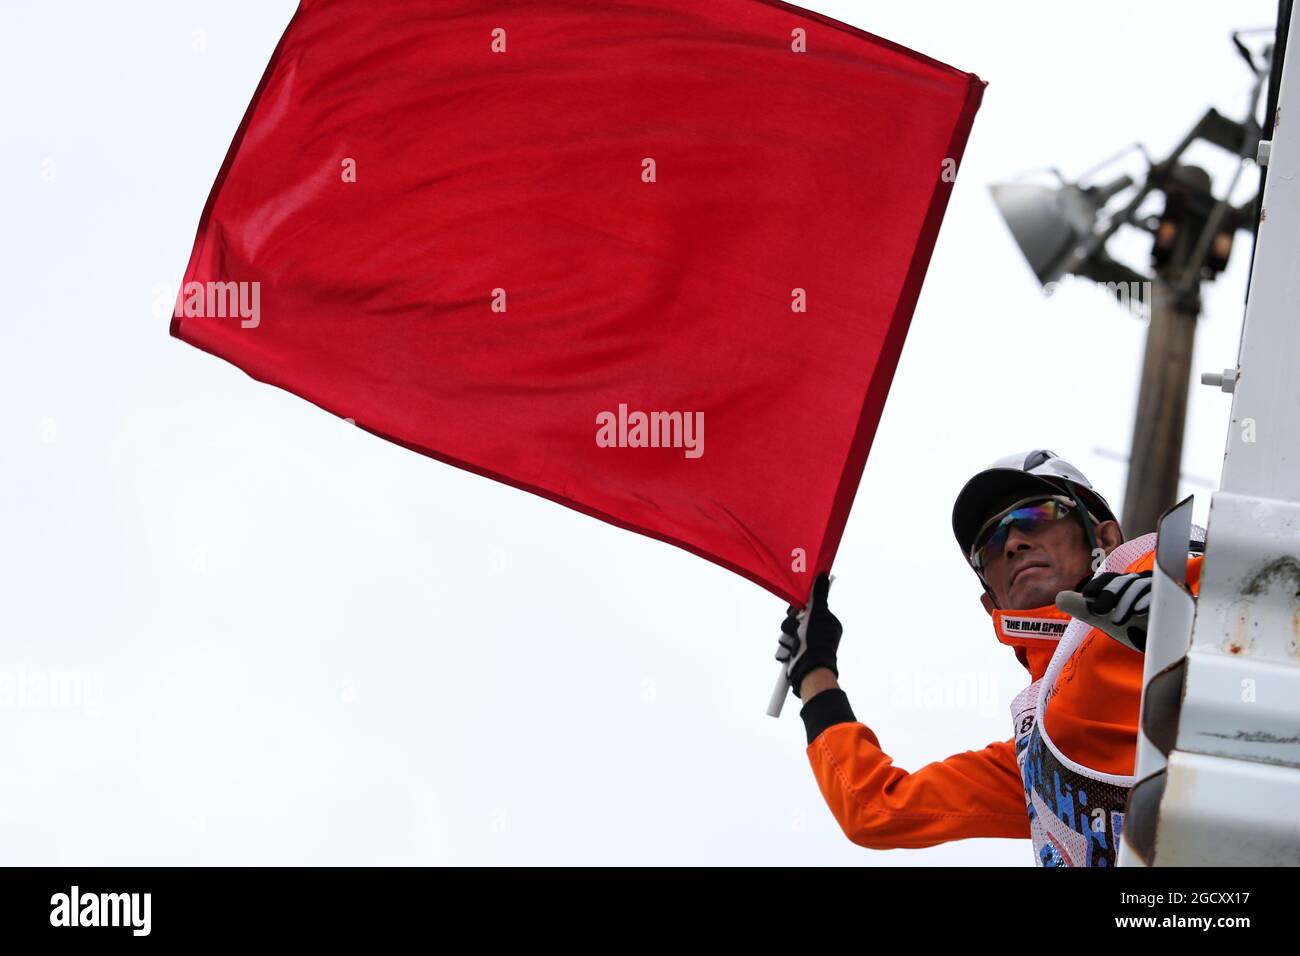 A marshal waves a red flag. Japanese Grand Prix, Friday 6th October 2017. Suzuka, Japan. Stock Photo